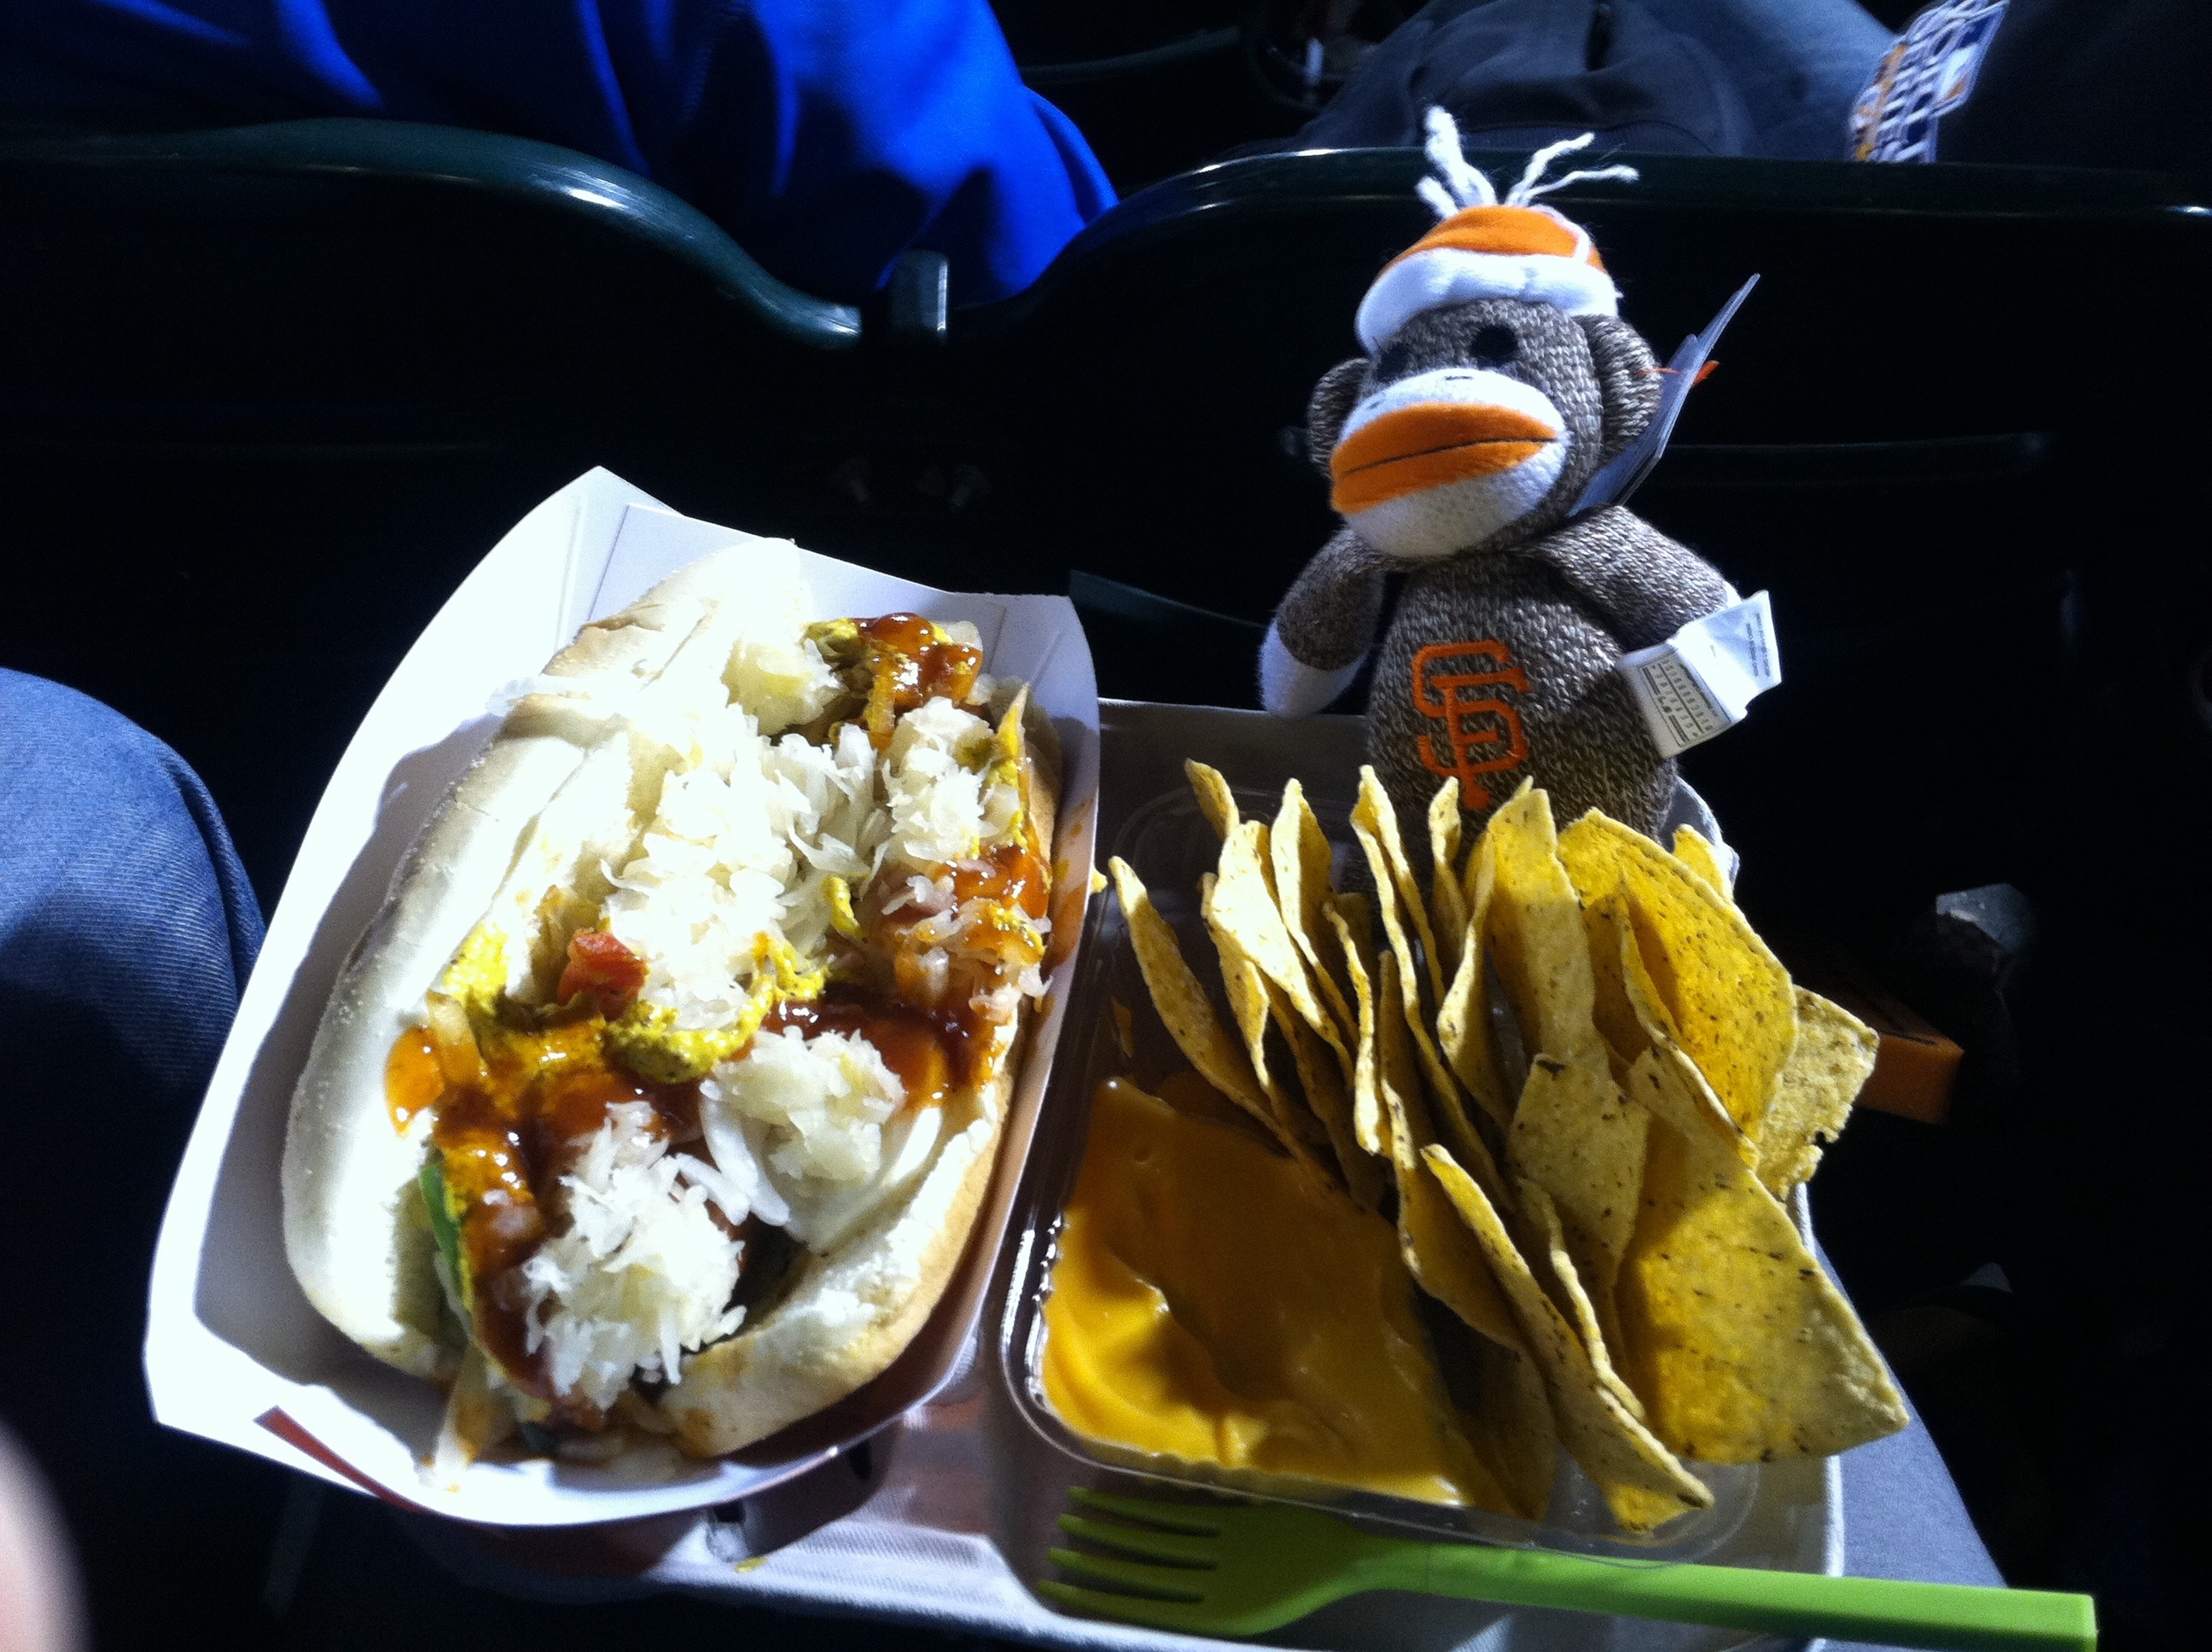 You have to eat, right? and you HAVE to get a sock monkey! #souvenirs